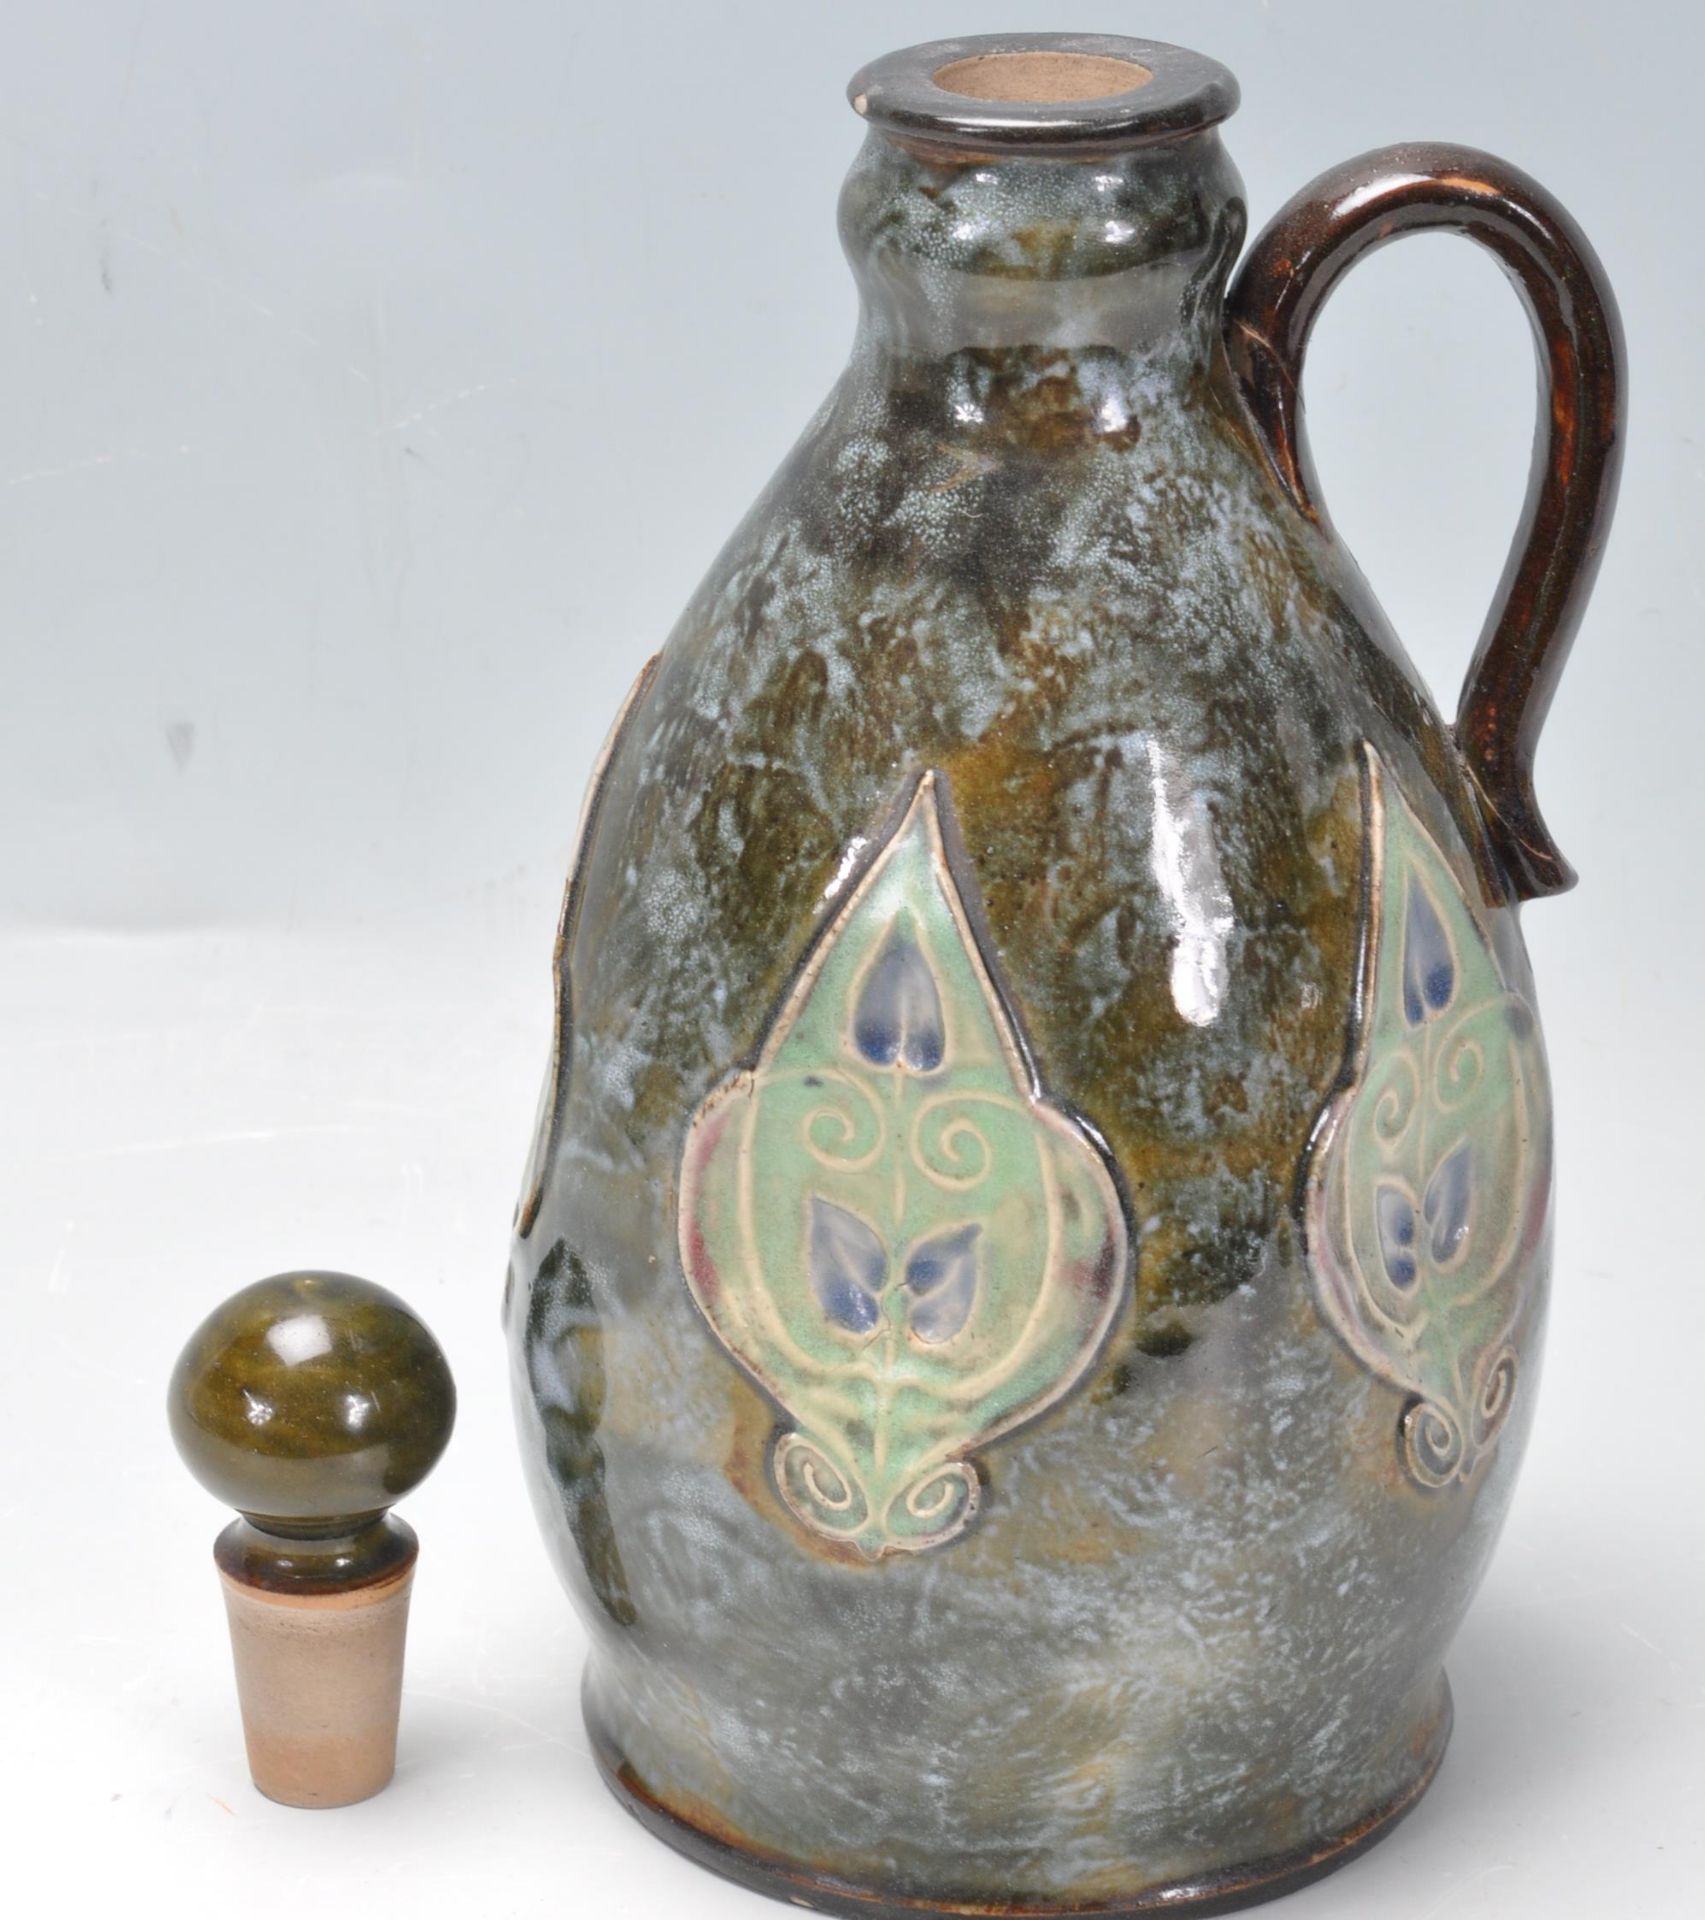 ROYAL DOULTON BOTTLE JUG WITH STOPPER - Image 2 of 7